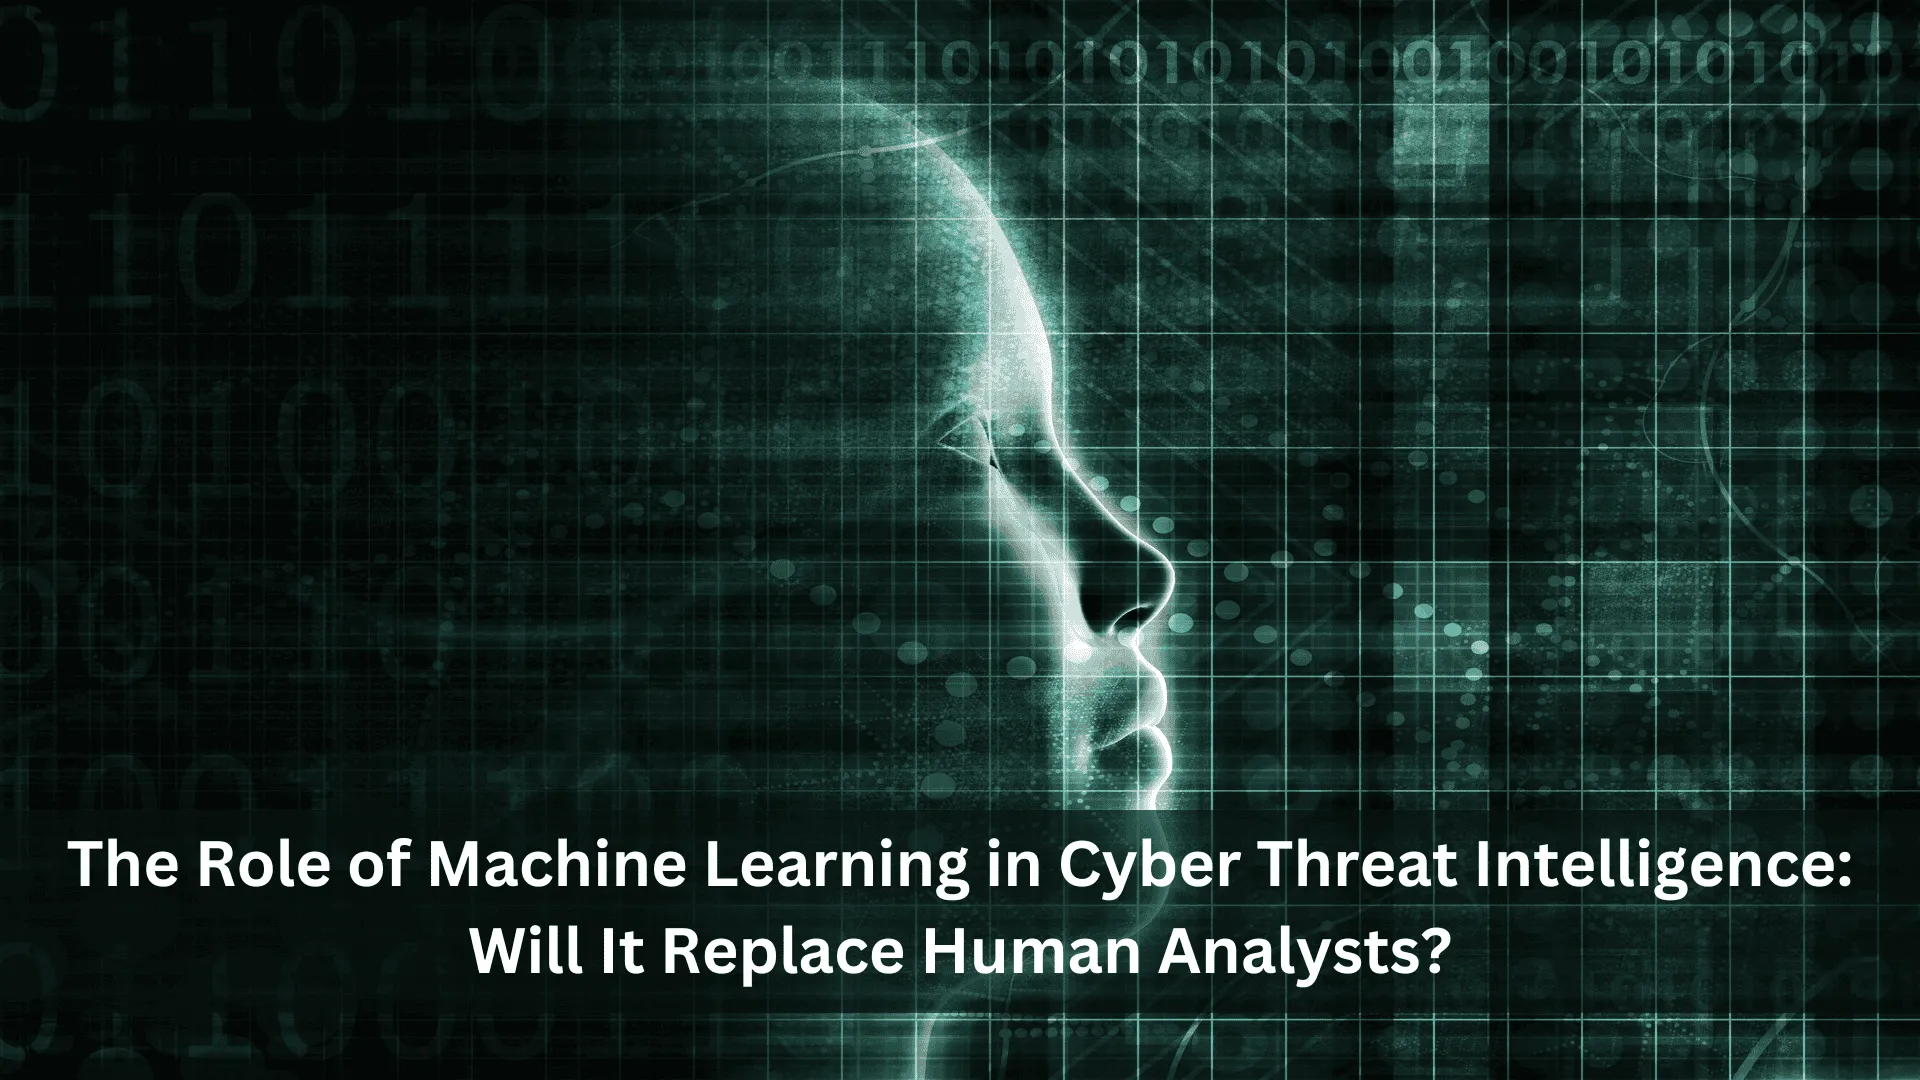 The Role of Machine Learning in Cyber Threat Intelligence: Will It Replace Human Analysts?